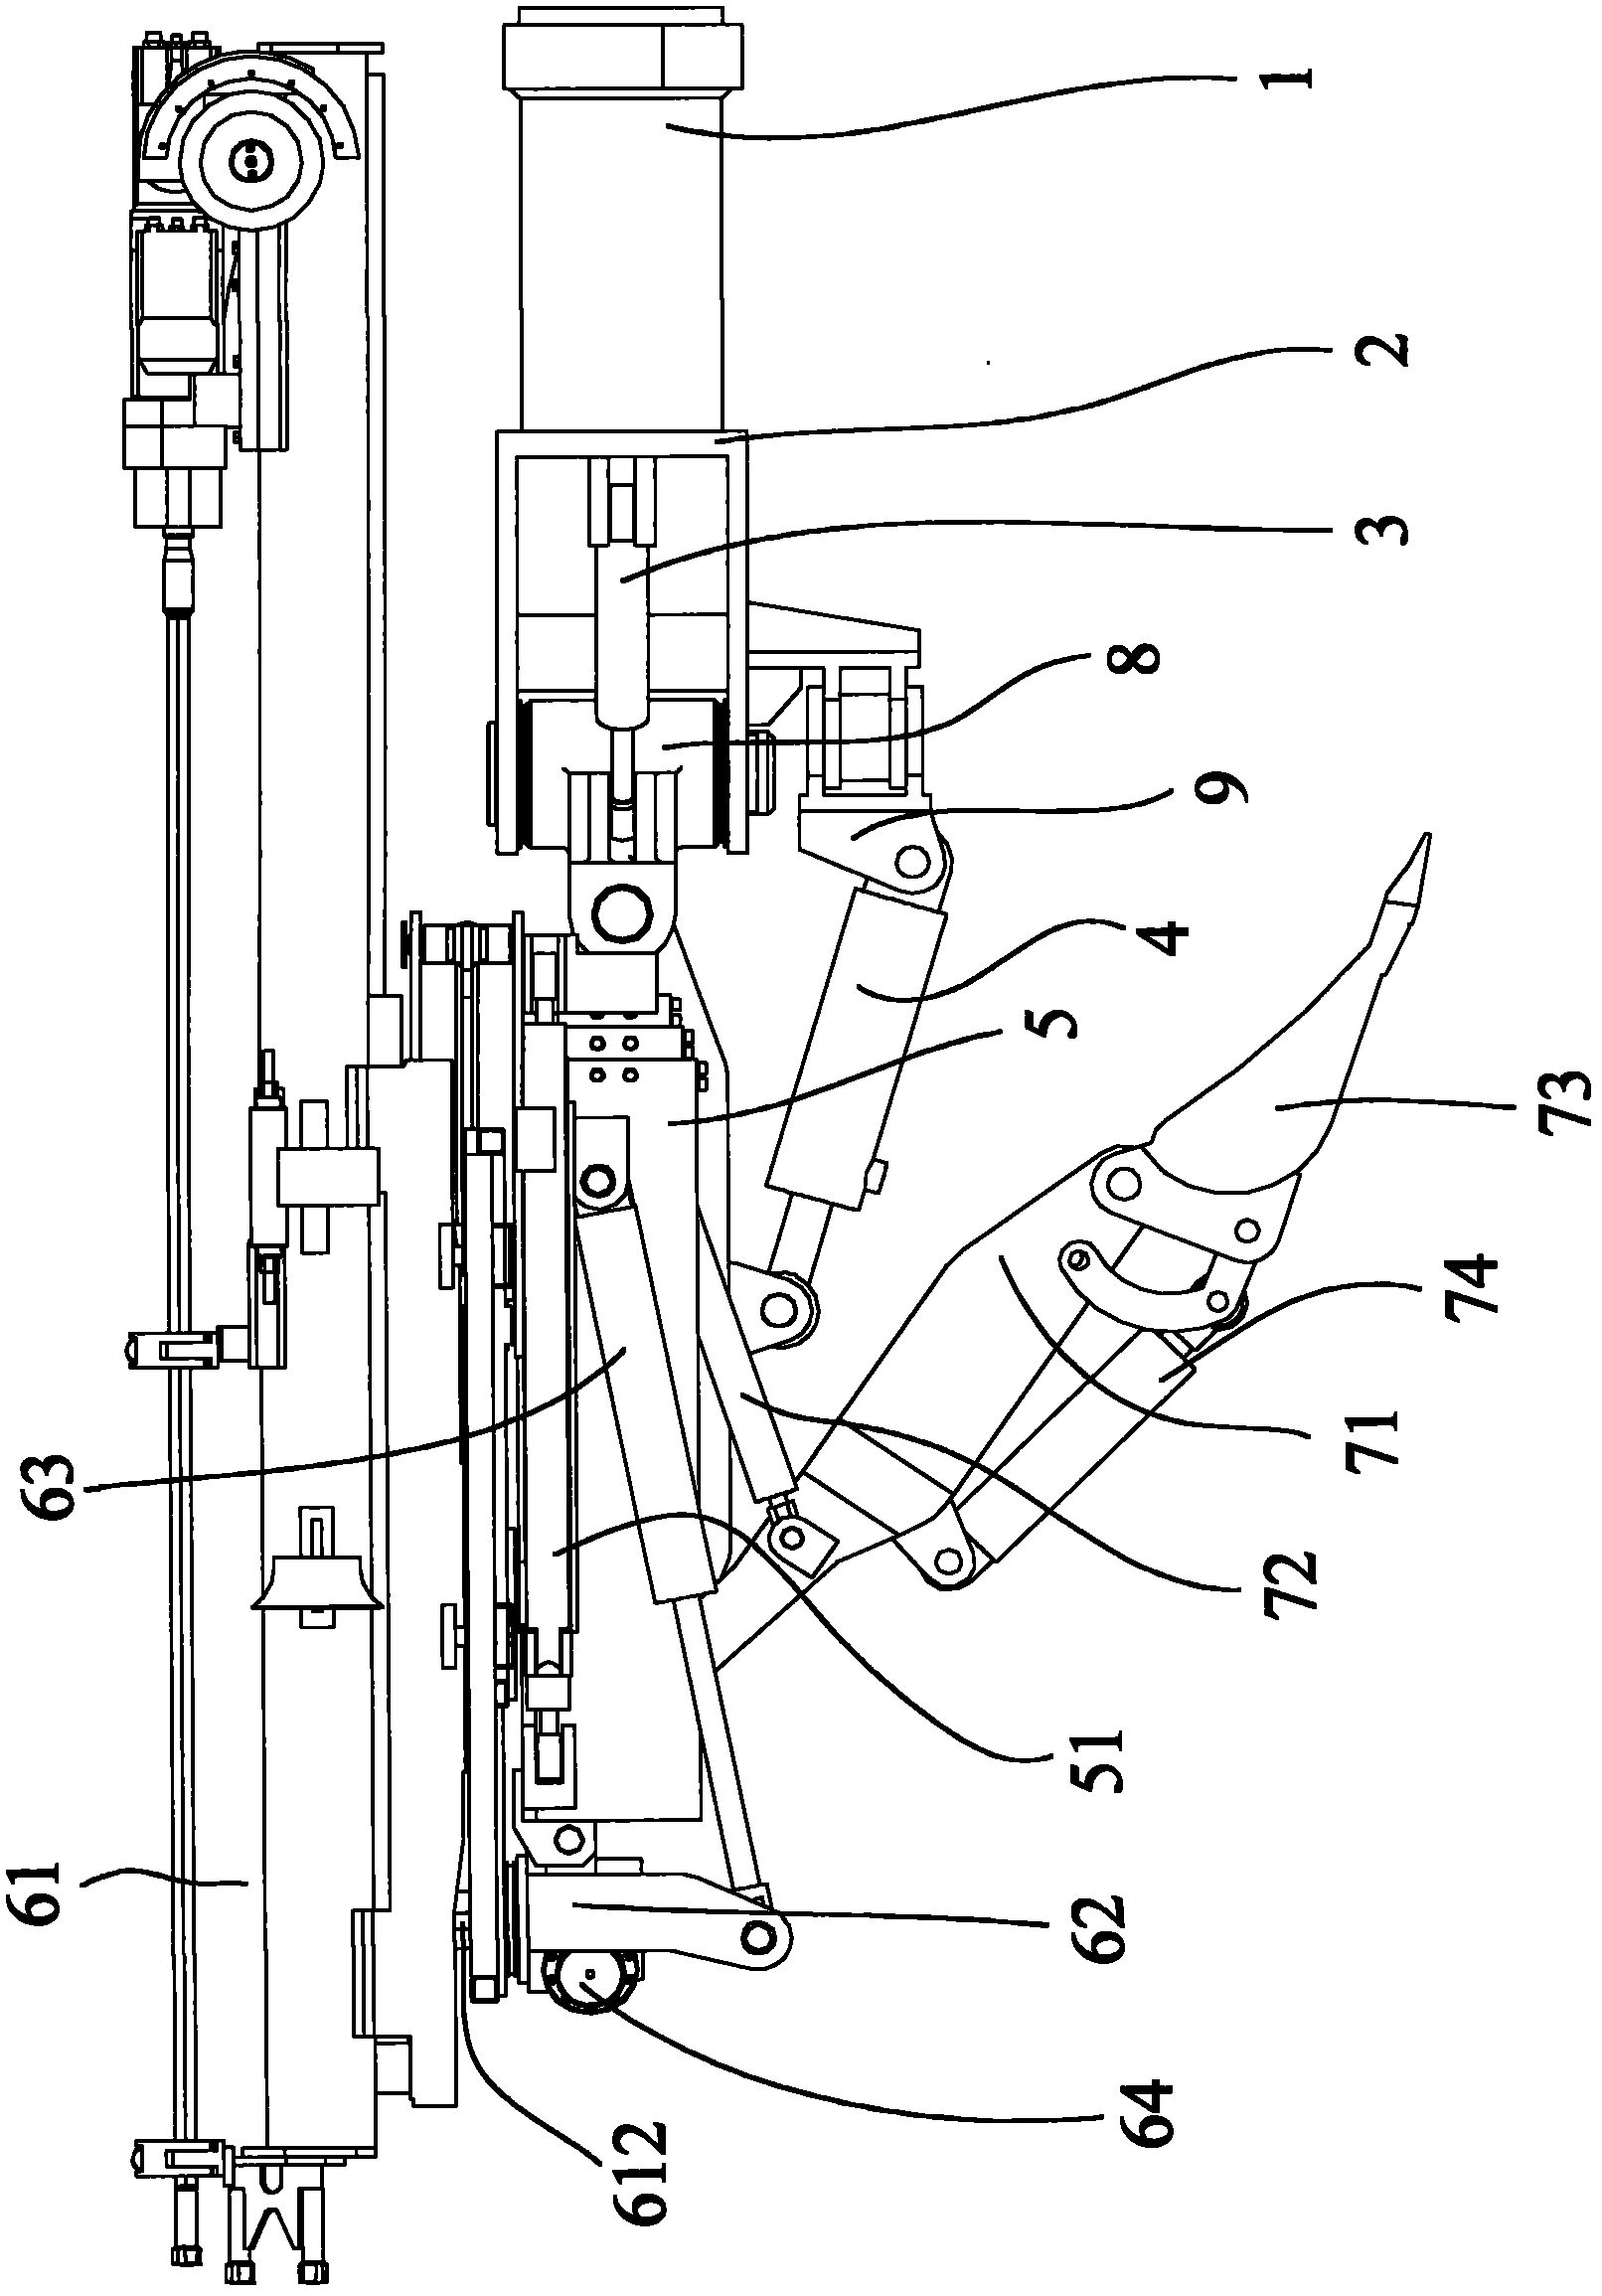 Drill loader working device